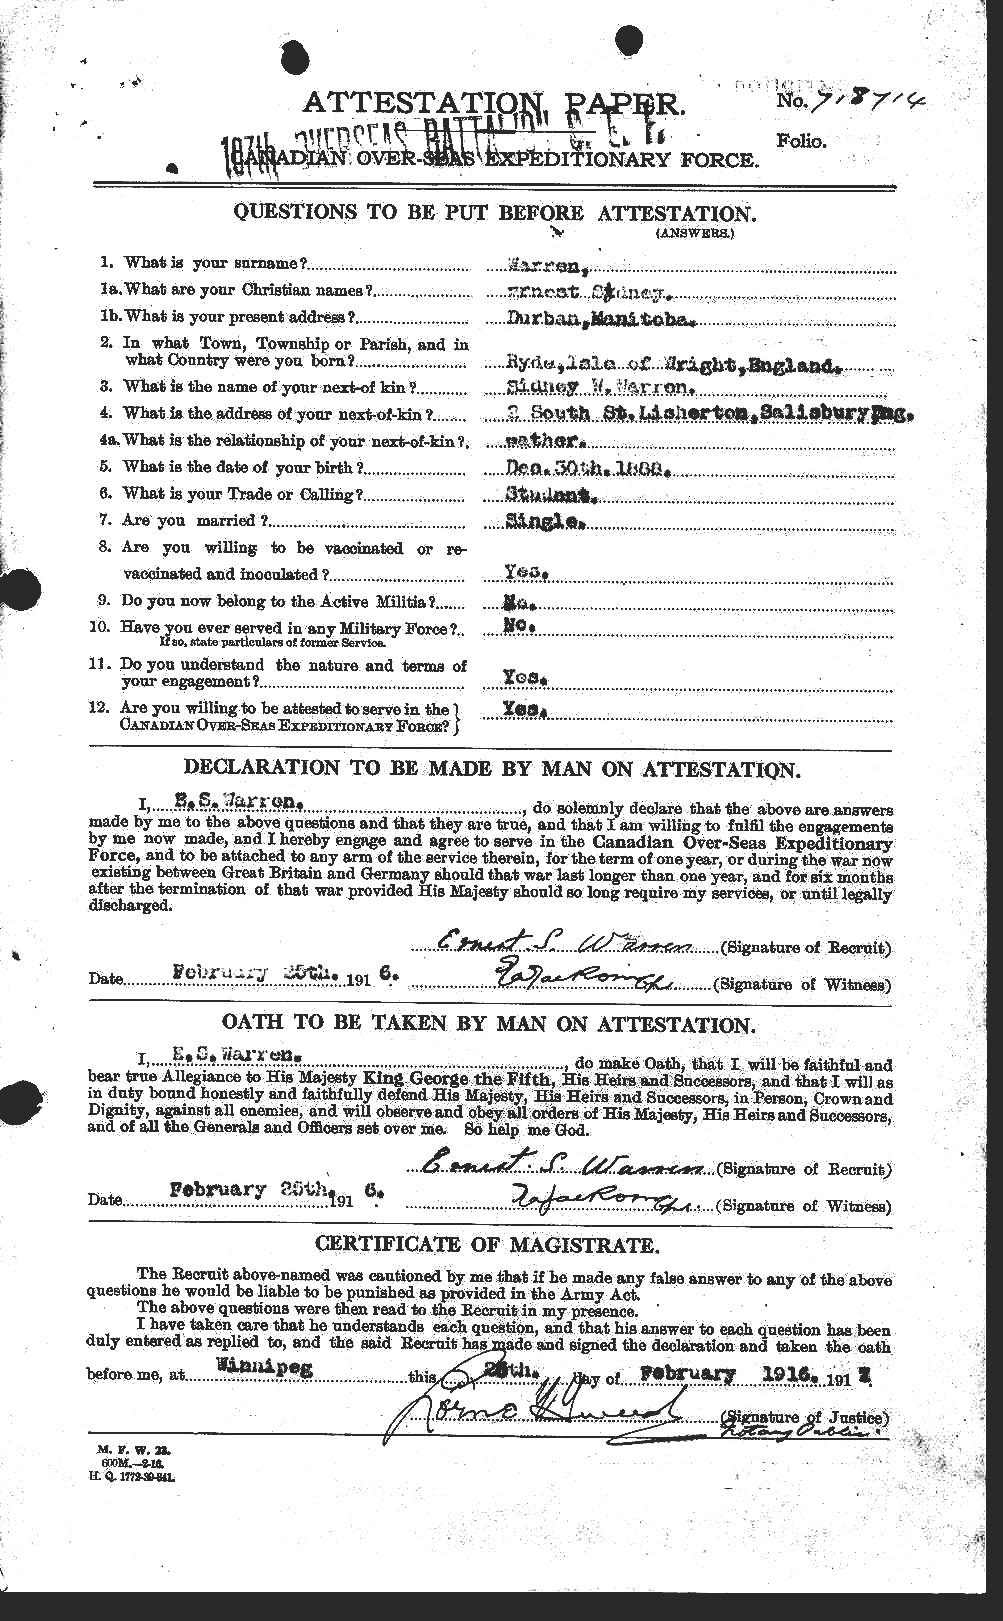 Personnel Records of the First World War - CEF 658424a